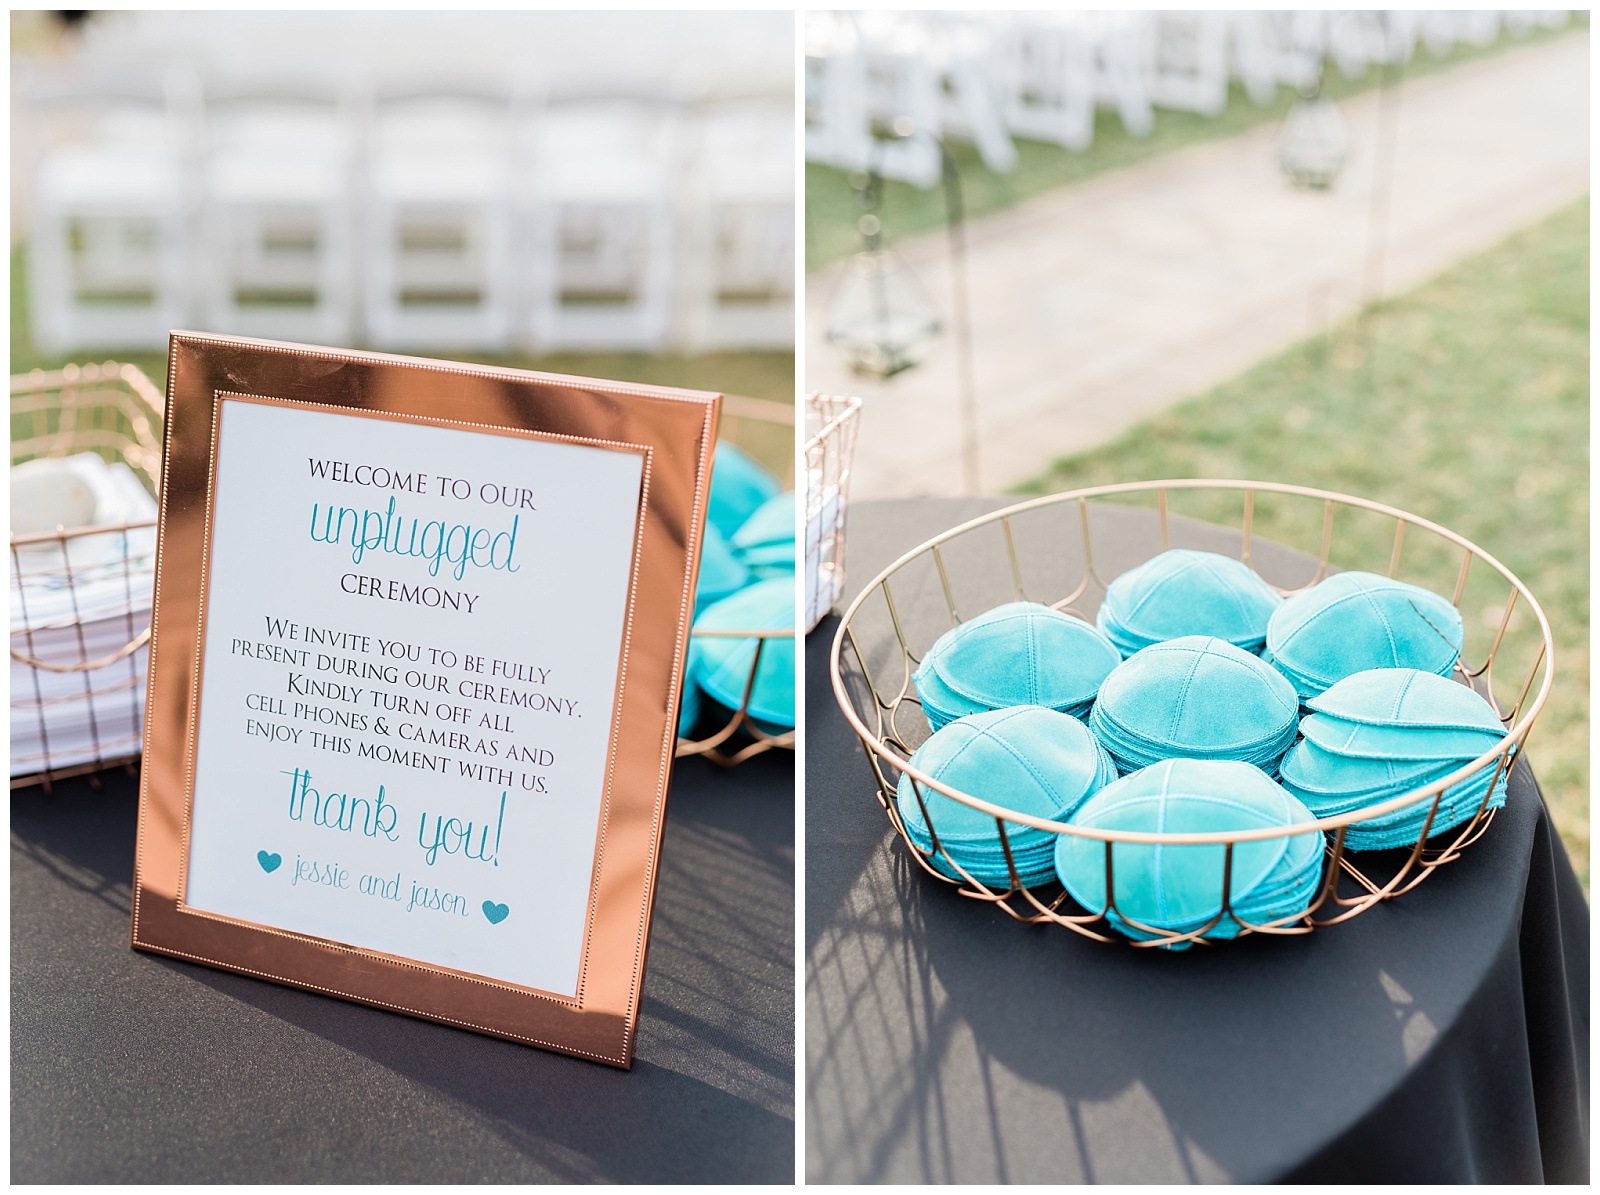 Jewish wedding ceremony details of an unplugged ceremony sign, and basket of teal yarmulke.